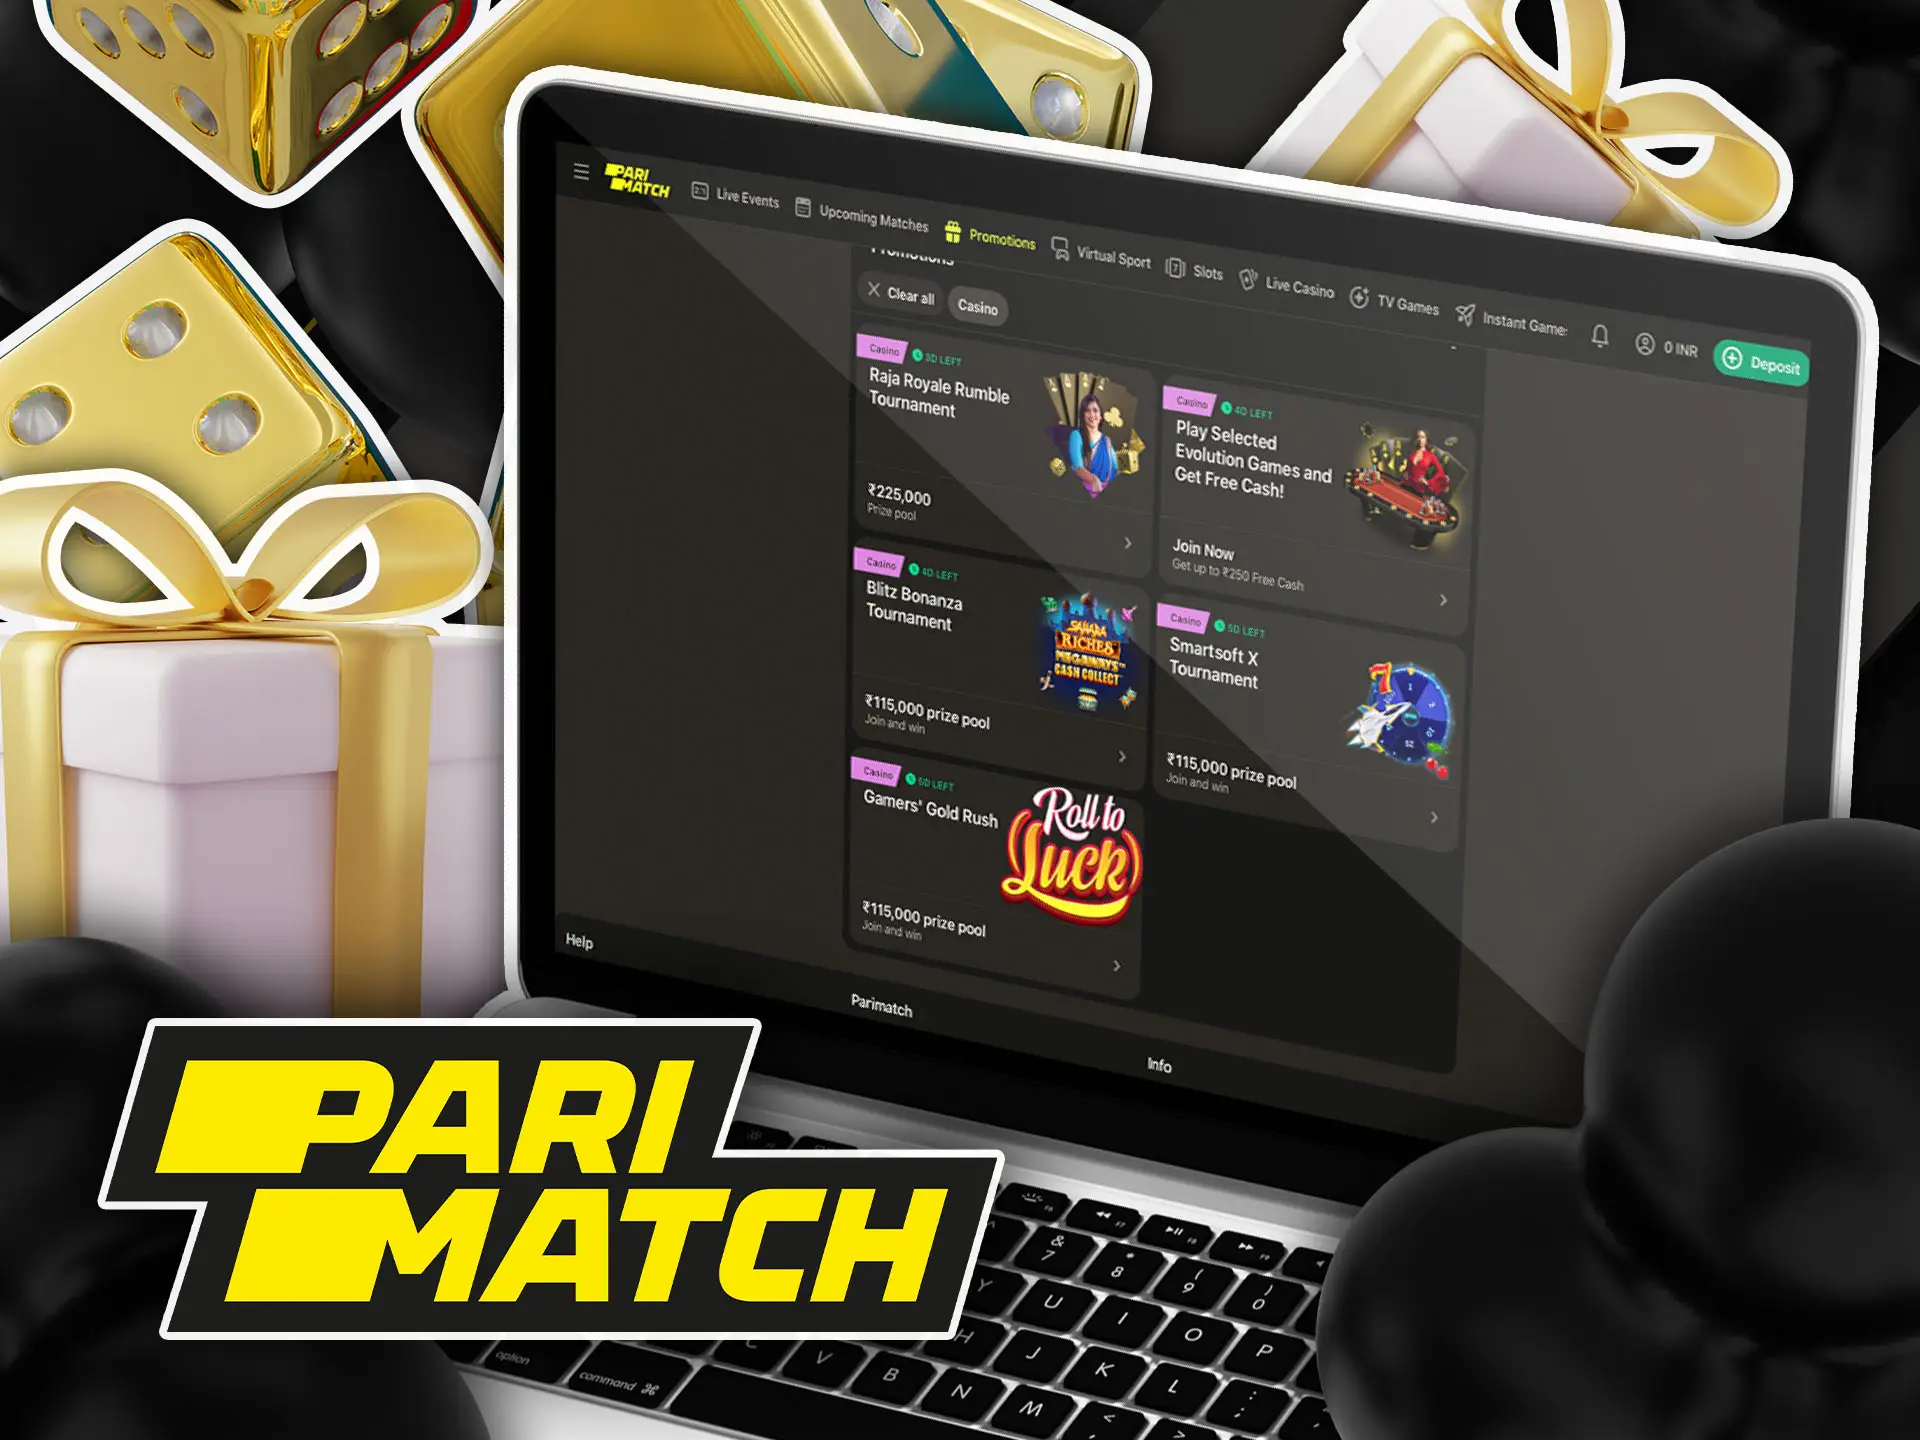 Sparkling New Year’s Roll bonus for Parimatch in India.